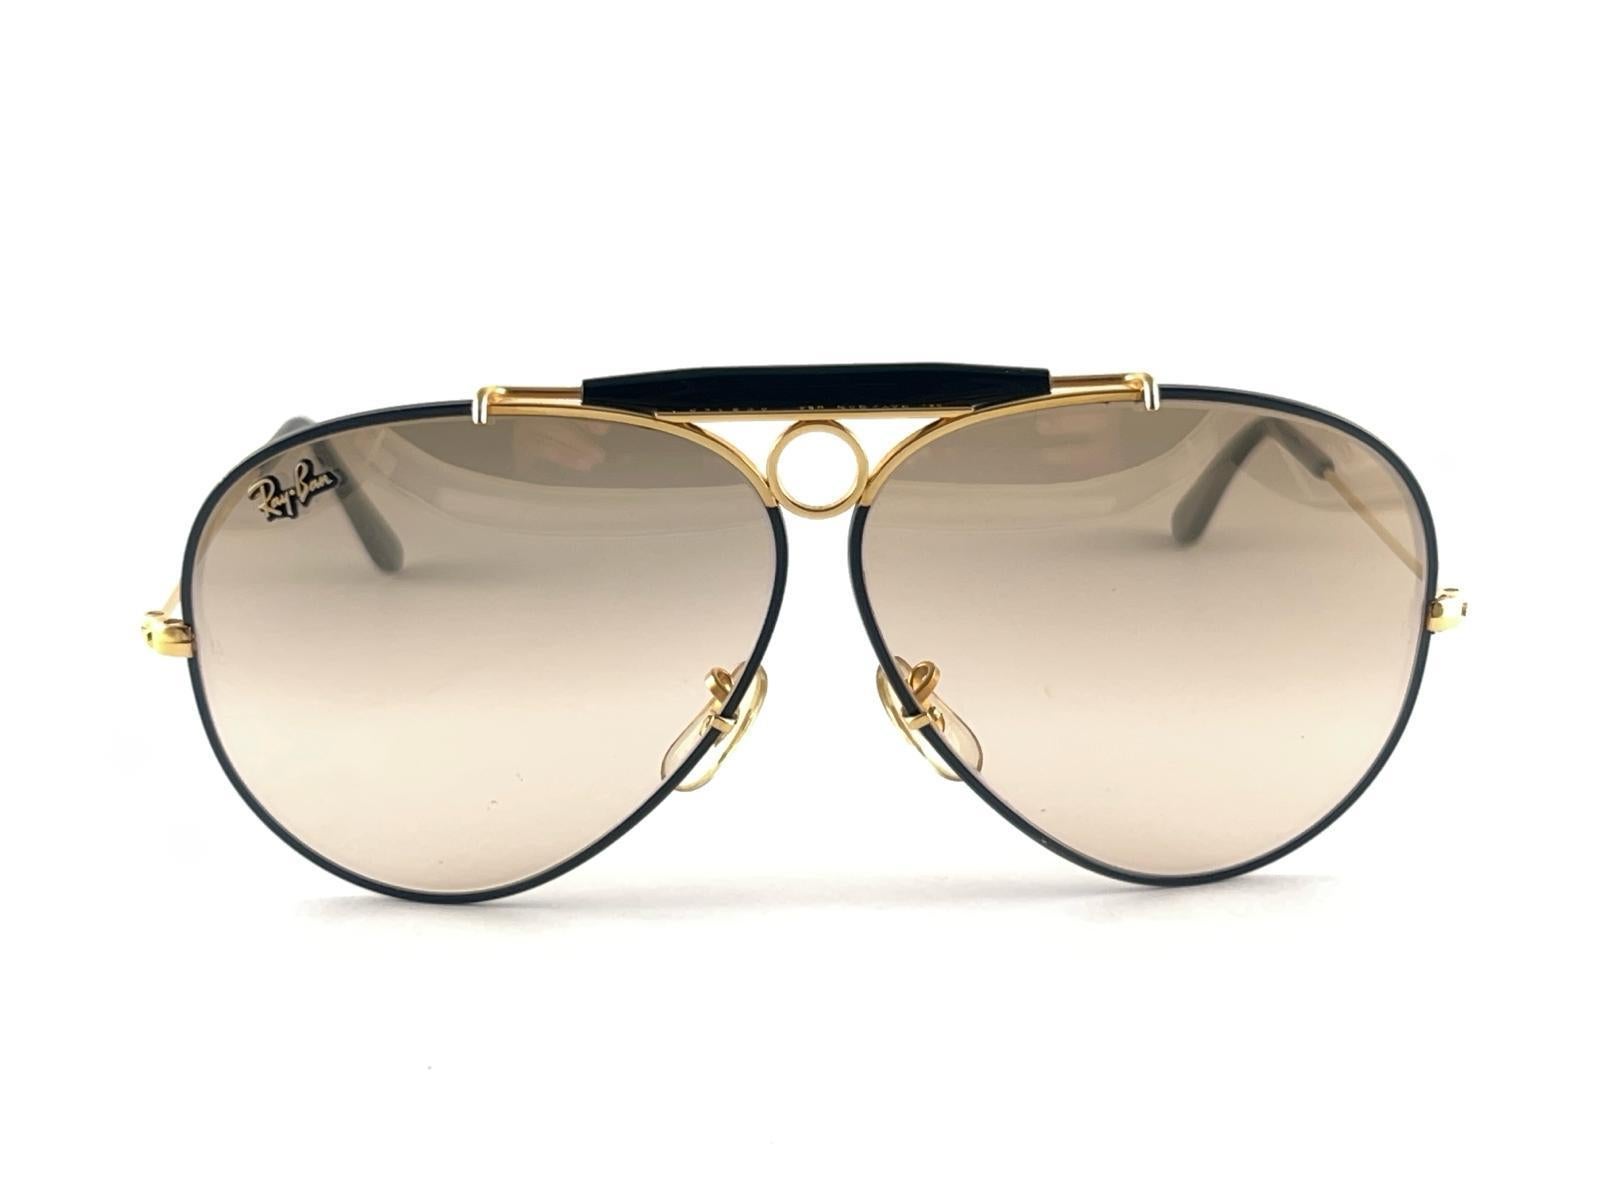 New Ray Ban Precious Metals 24K Gold & Black Shooter 62Mm USA Sunglasses In New Condition For Sale In Baleares, Baleares